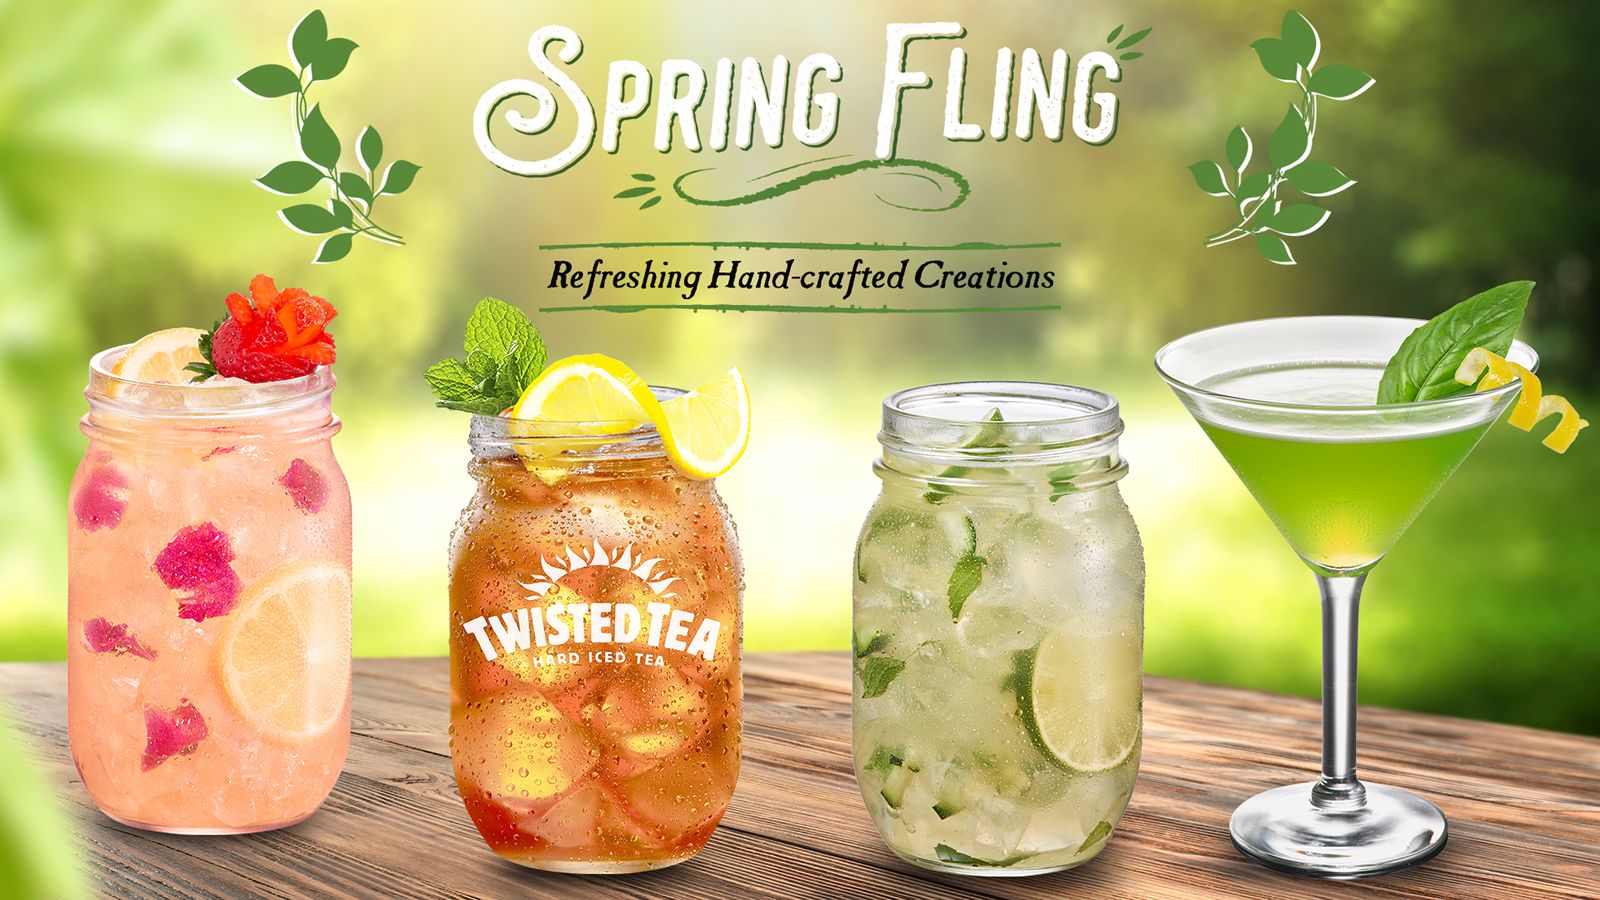 Enjoy a Spring Fling with Bennigan's New Handcrafted Cocktails